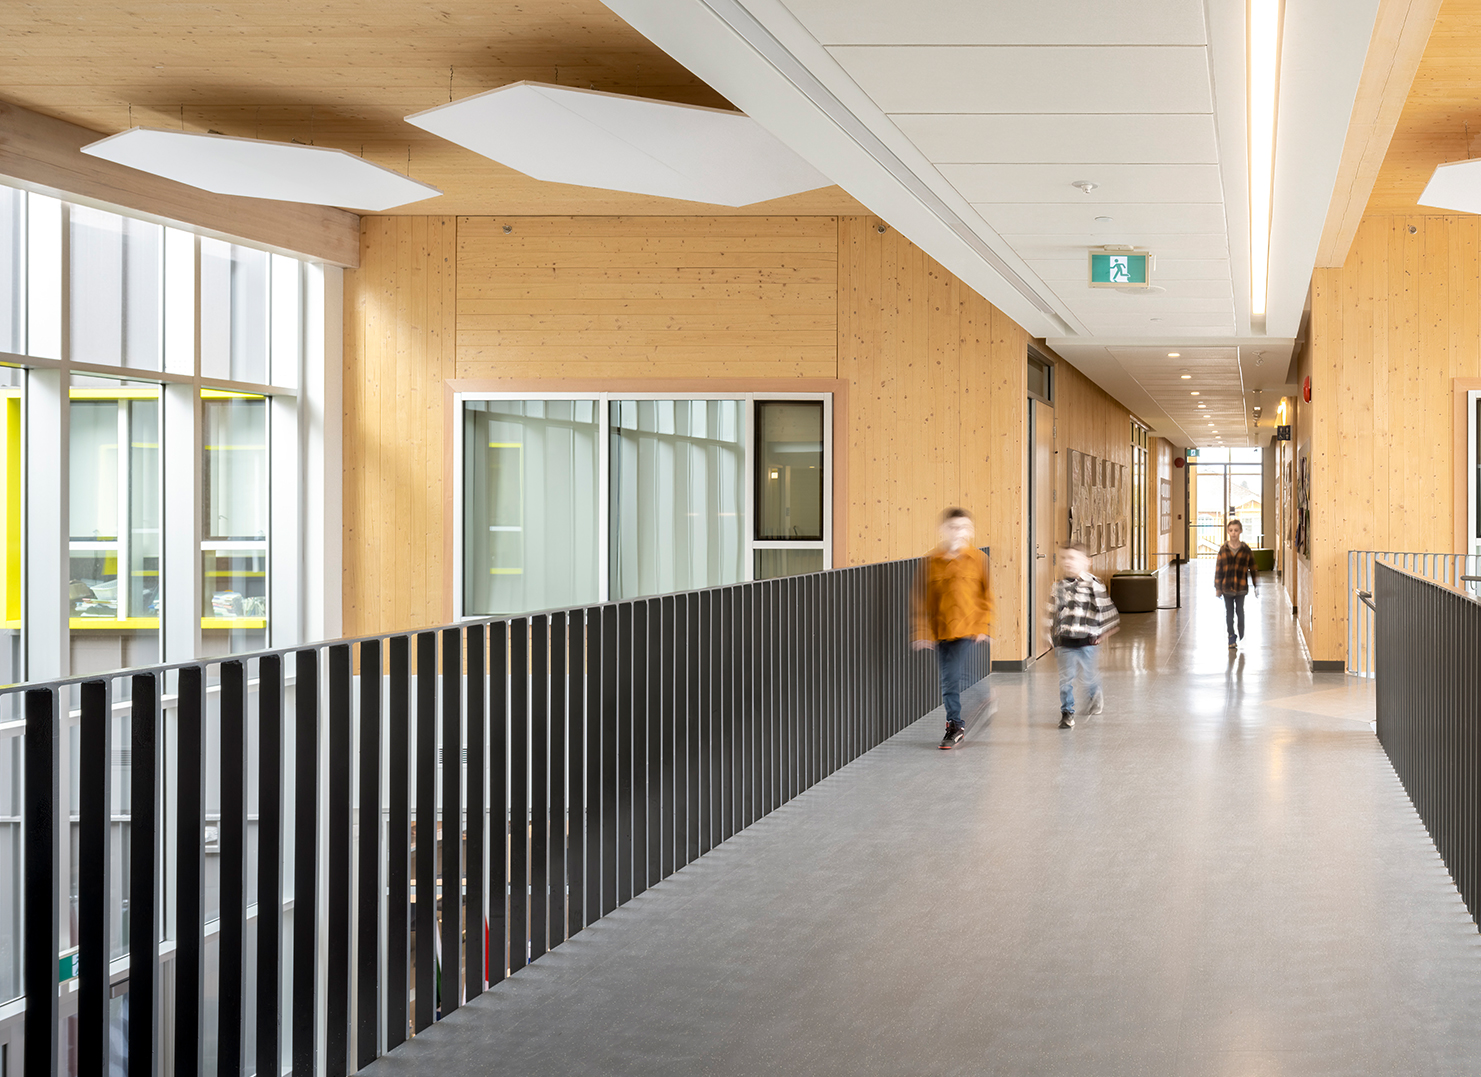 A long, well-lit corridor in the school, with wooden walls and ceiling in the background and a metal railing on either side of the walkway. White hexagonal panels are attached to the ceiling. Blurred figures are passing through.